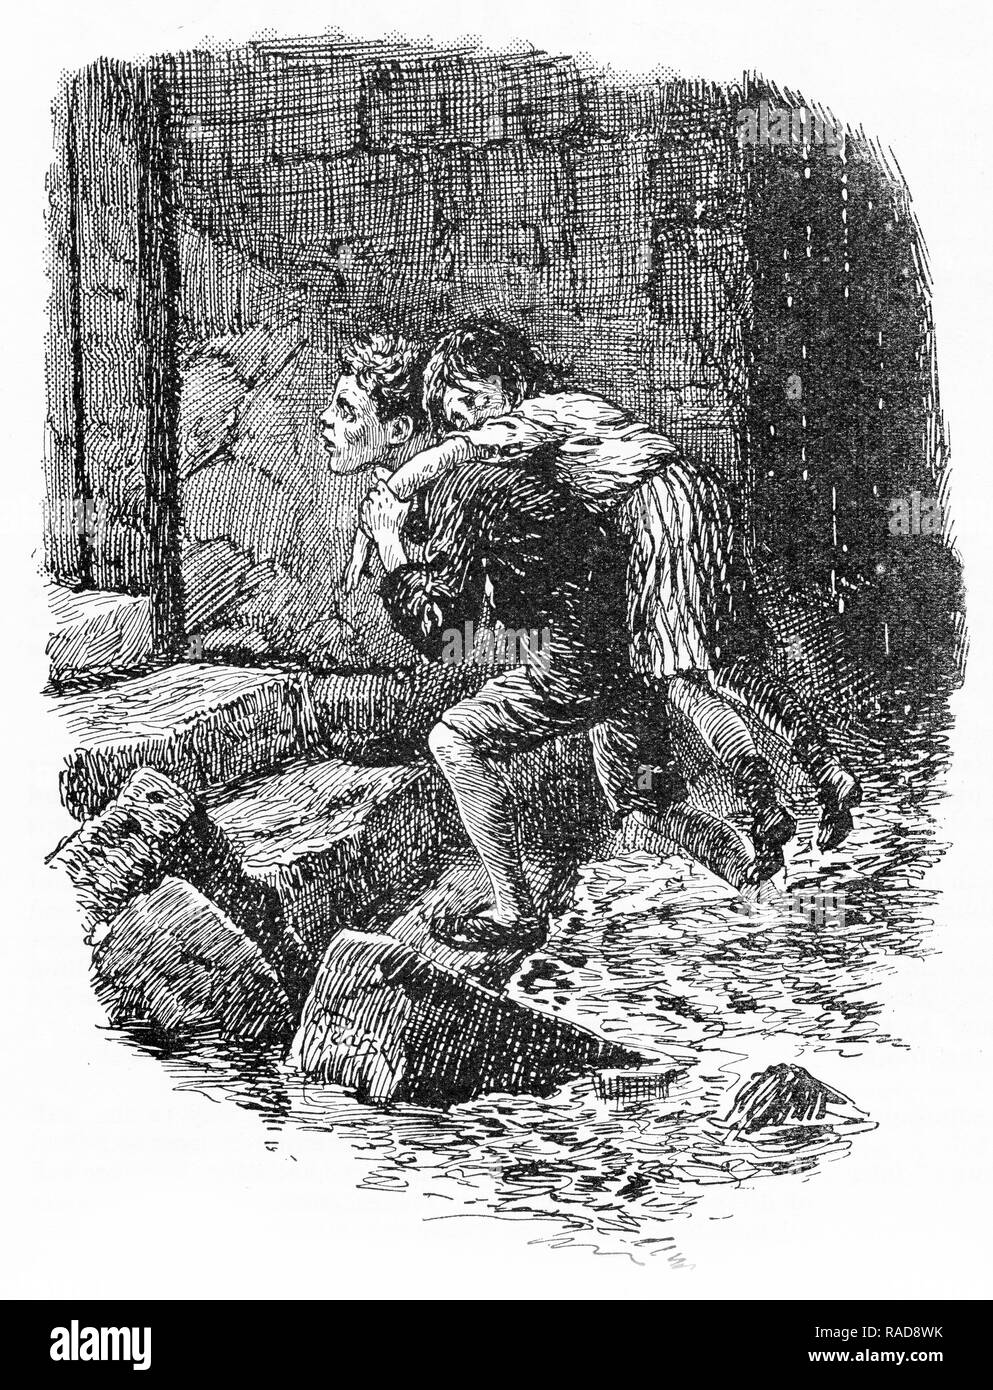 Engraving of a boy rescuing another from a flooded building. From an original engraving in the Boys Own Annual 1925. Stock Photo